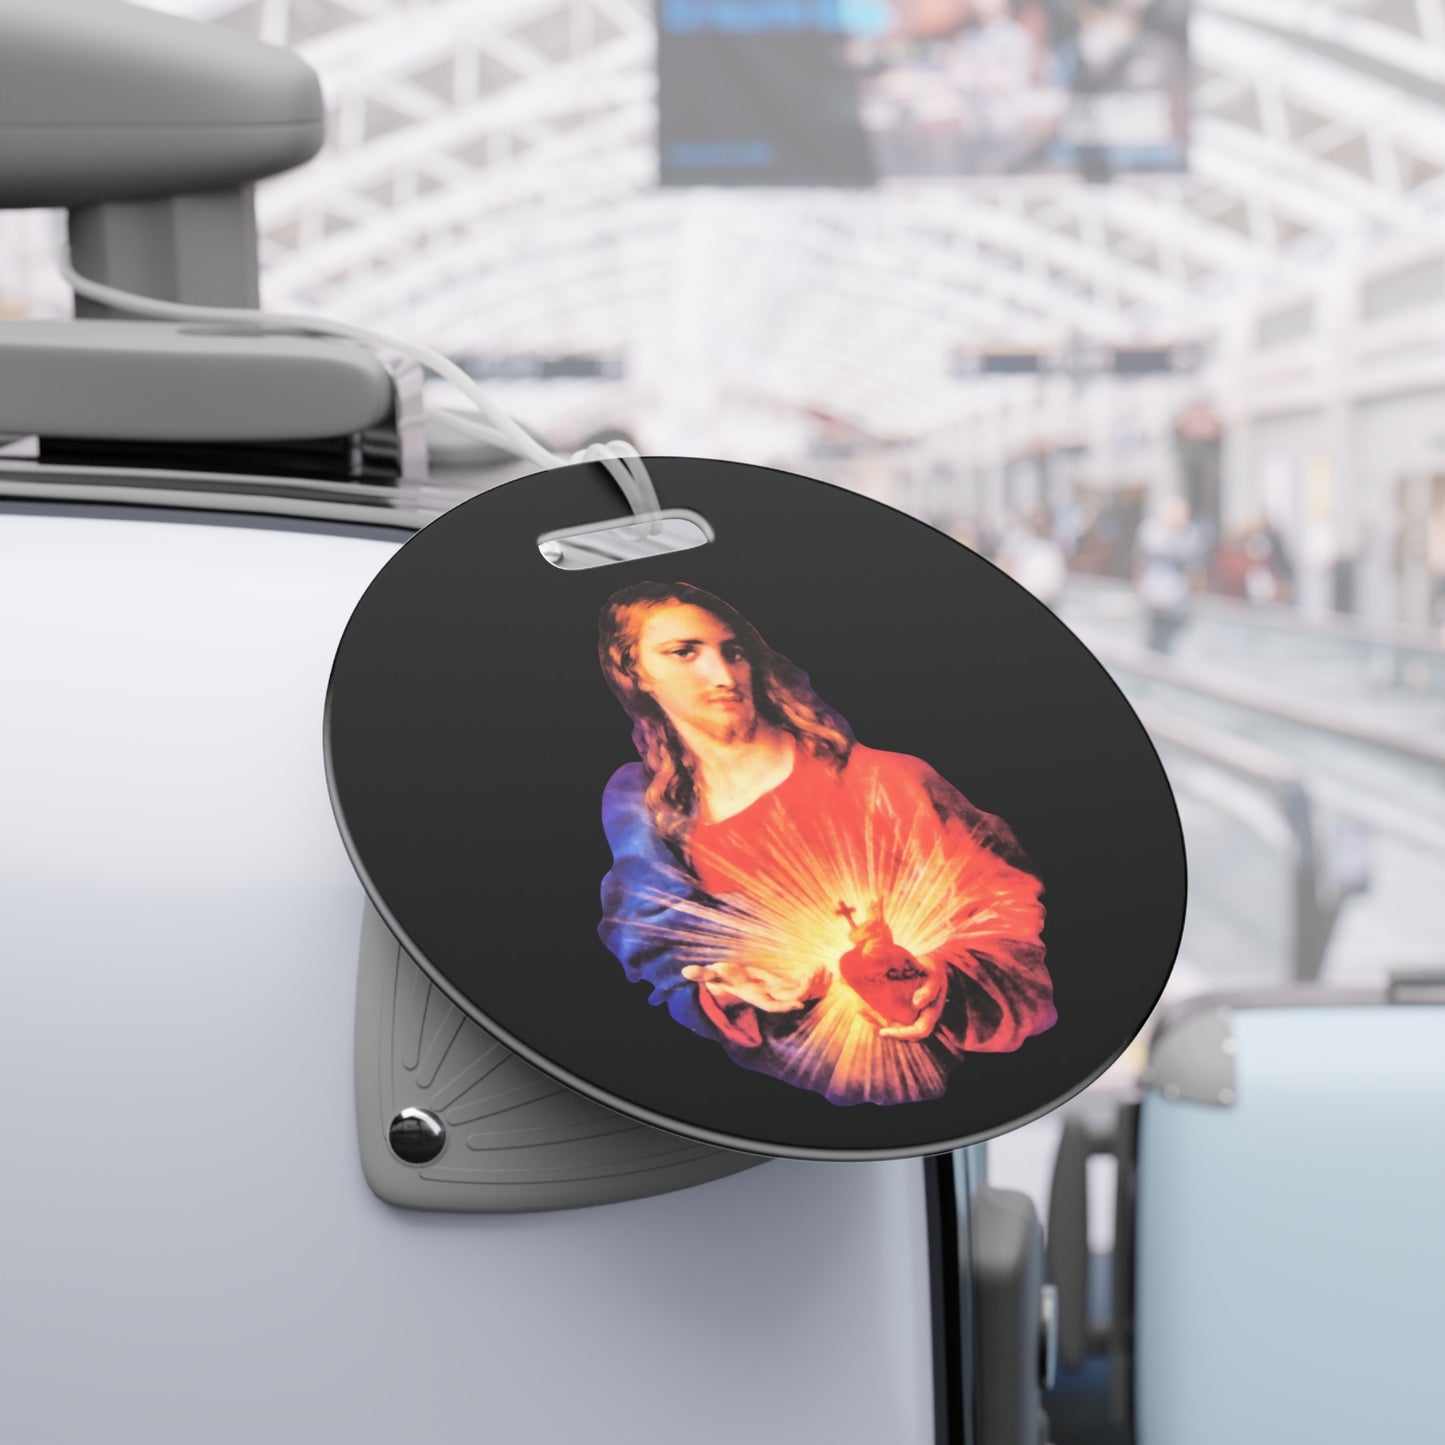 Sacred Heart of Jesus | Immaculate Heart of Mary Luggage Tags